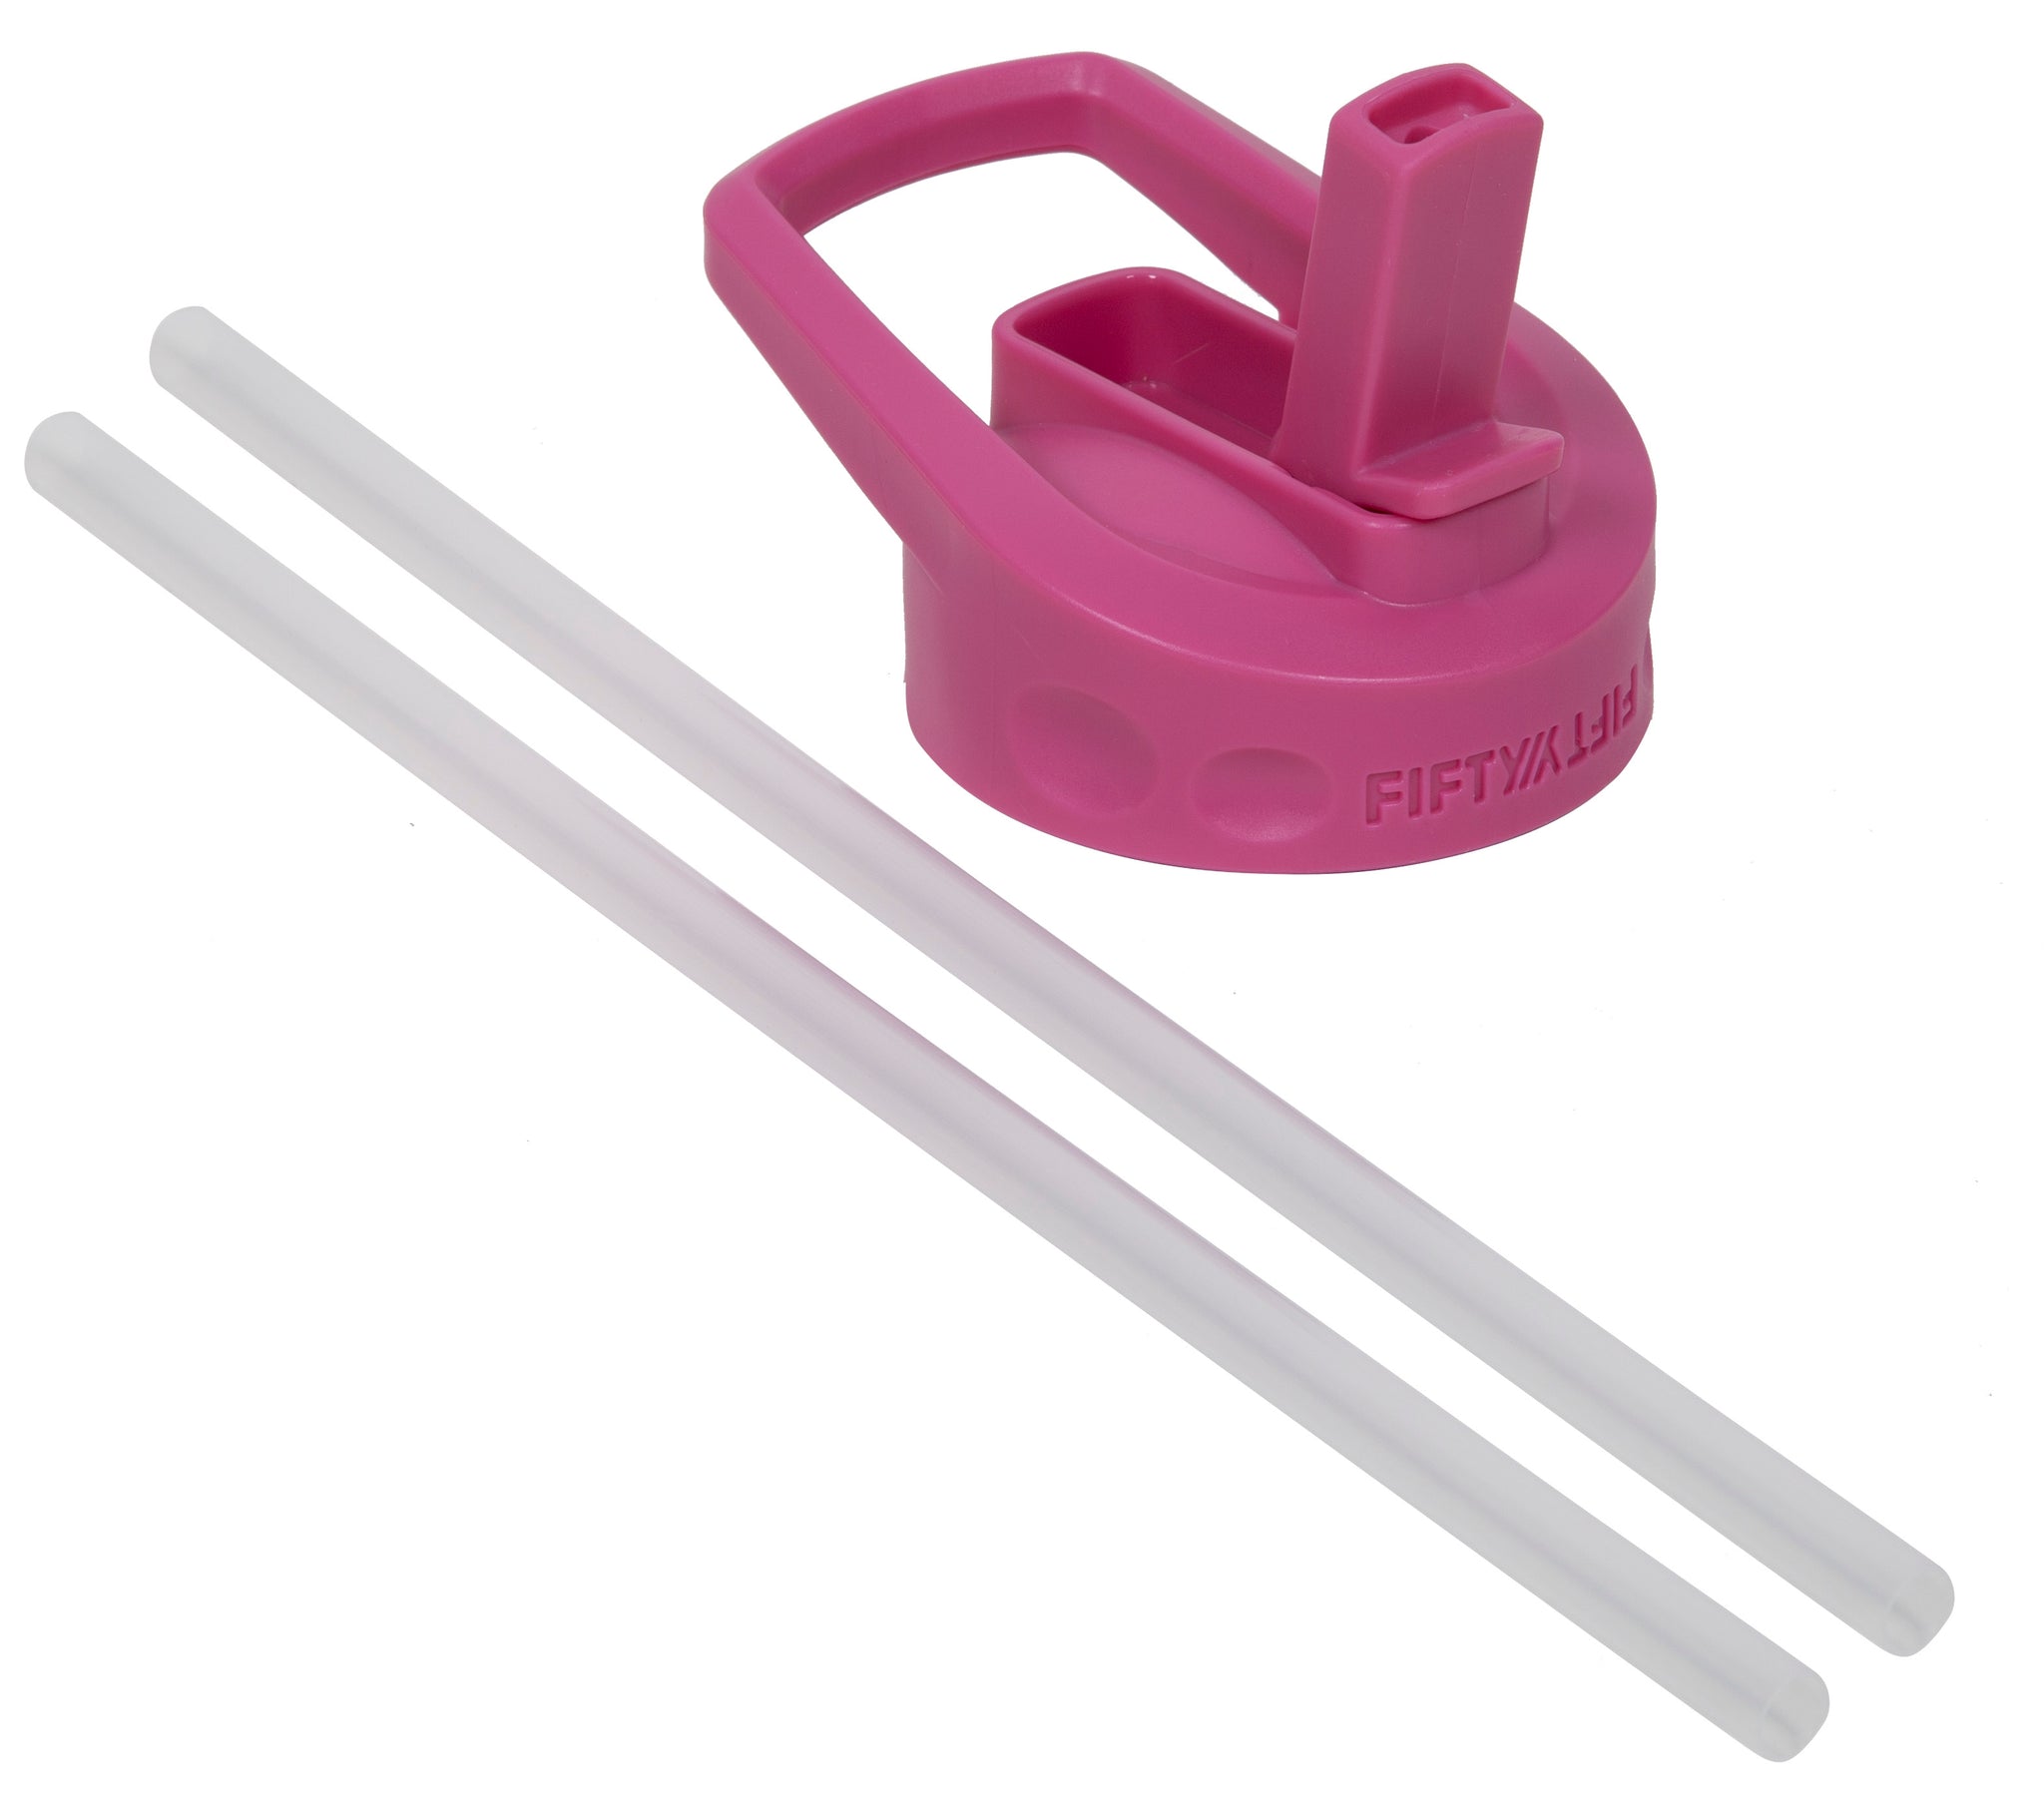 Wide Mouth Straw Lid - TEMPERCRAFT